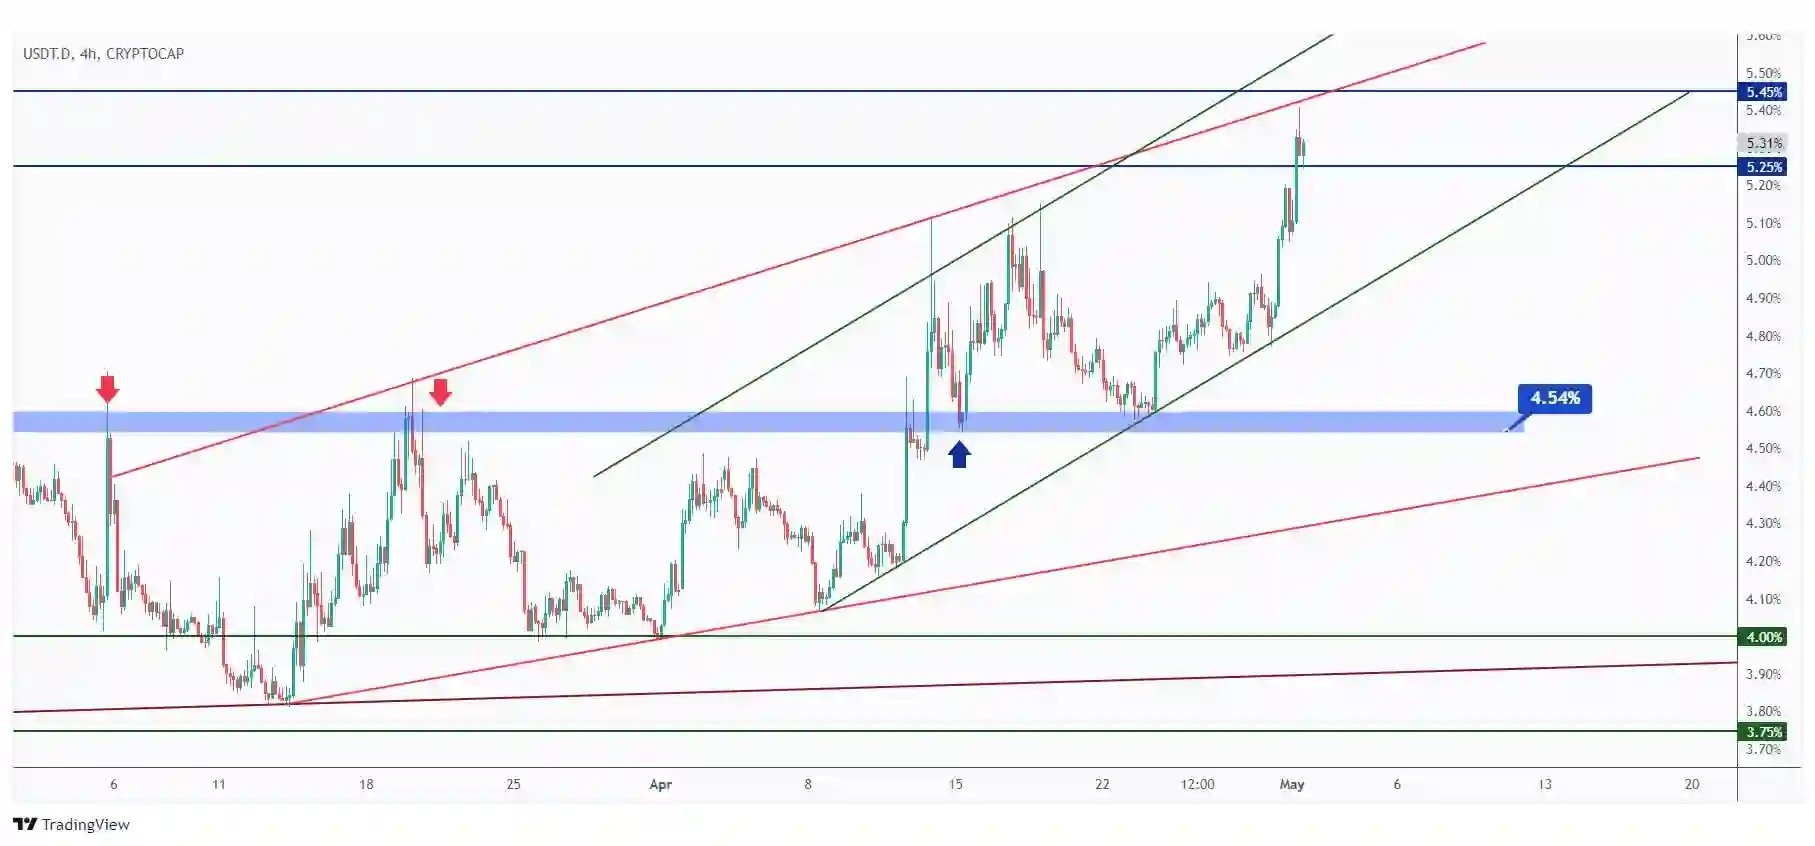 USDT.D 4h chart overall bullish trading within two rising channels and currently hovering around the upper bound.